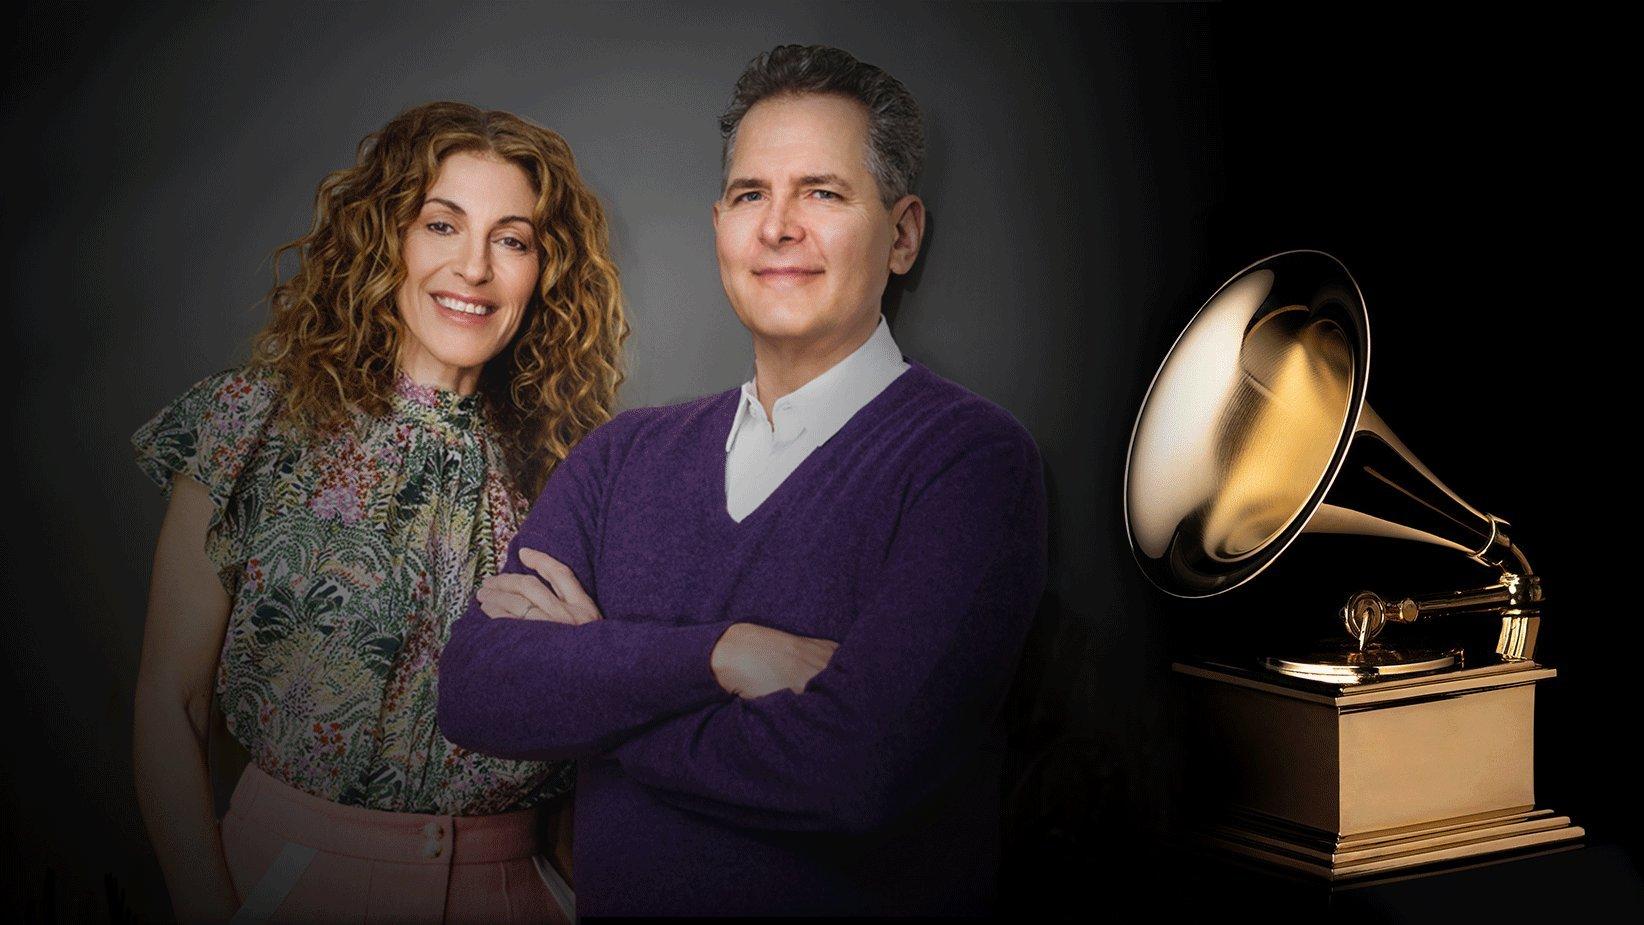 Atlantic Records Leading Lights Julie Greenwald And Craig Kallman To Receive GRAMMY Salute To Industry Icons Honor GRAMMY photo pic